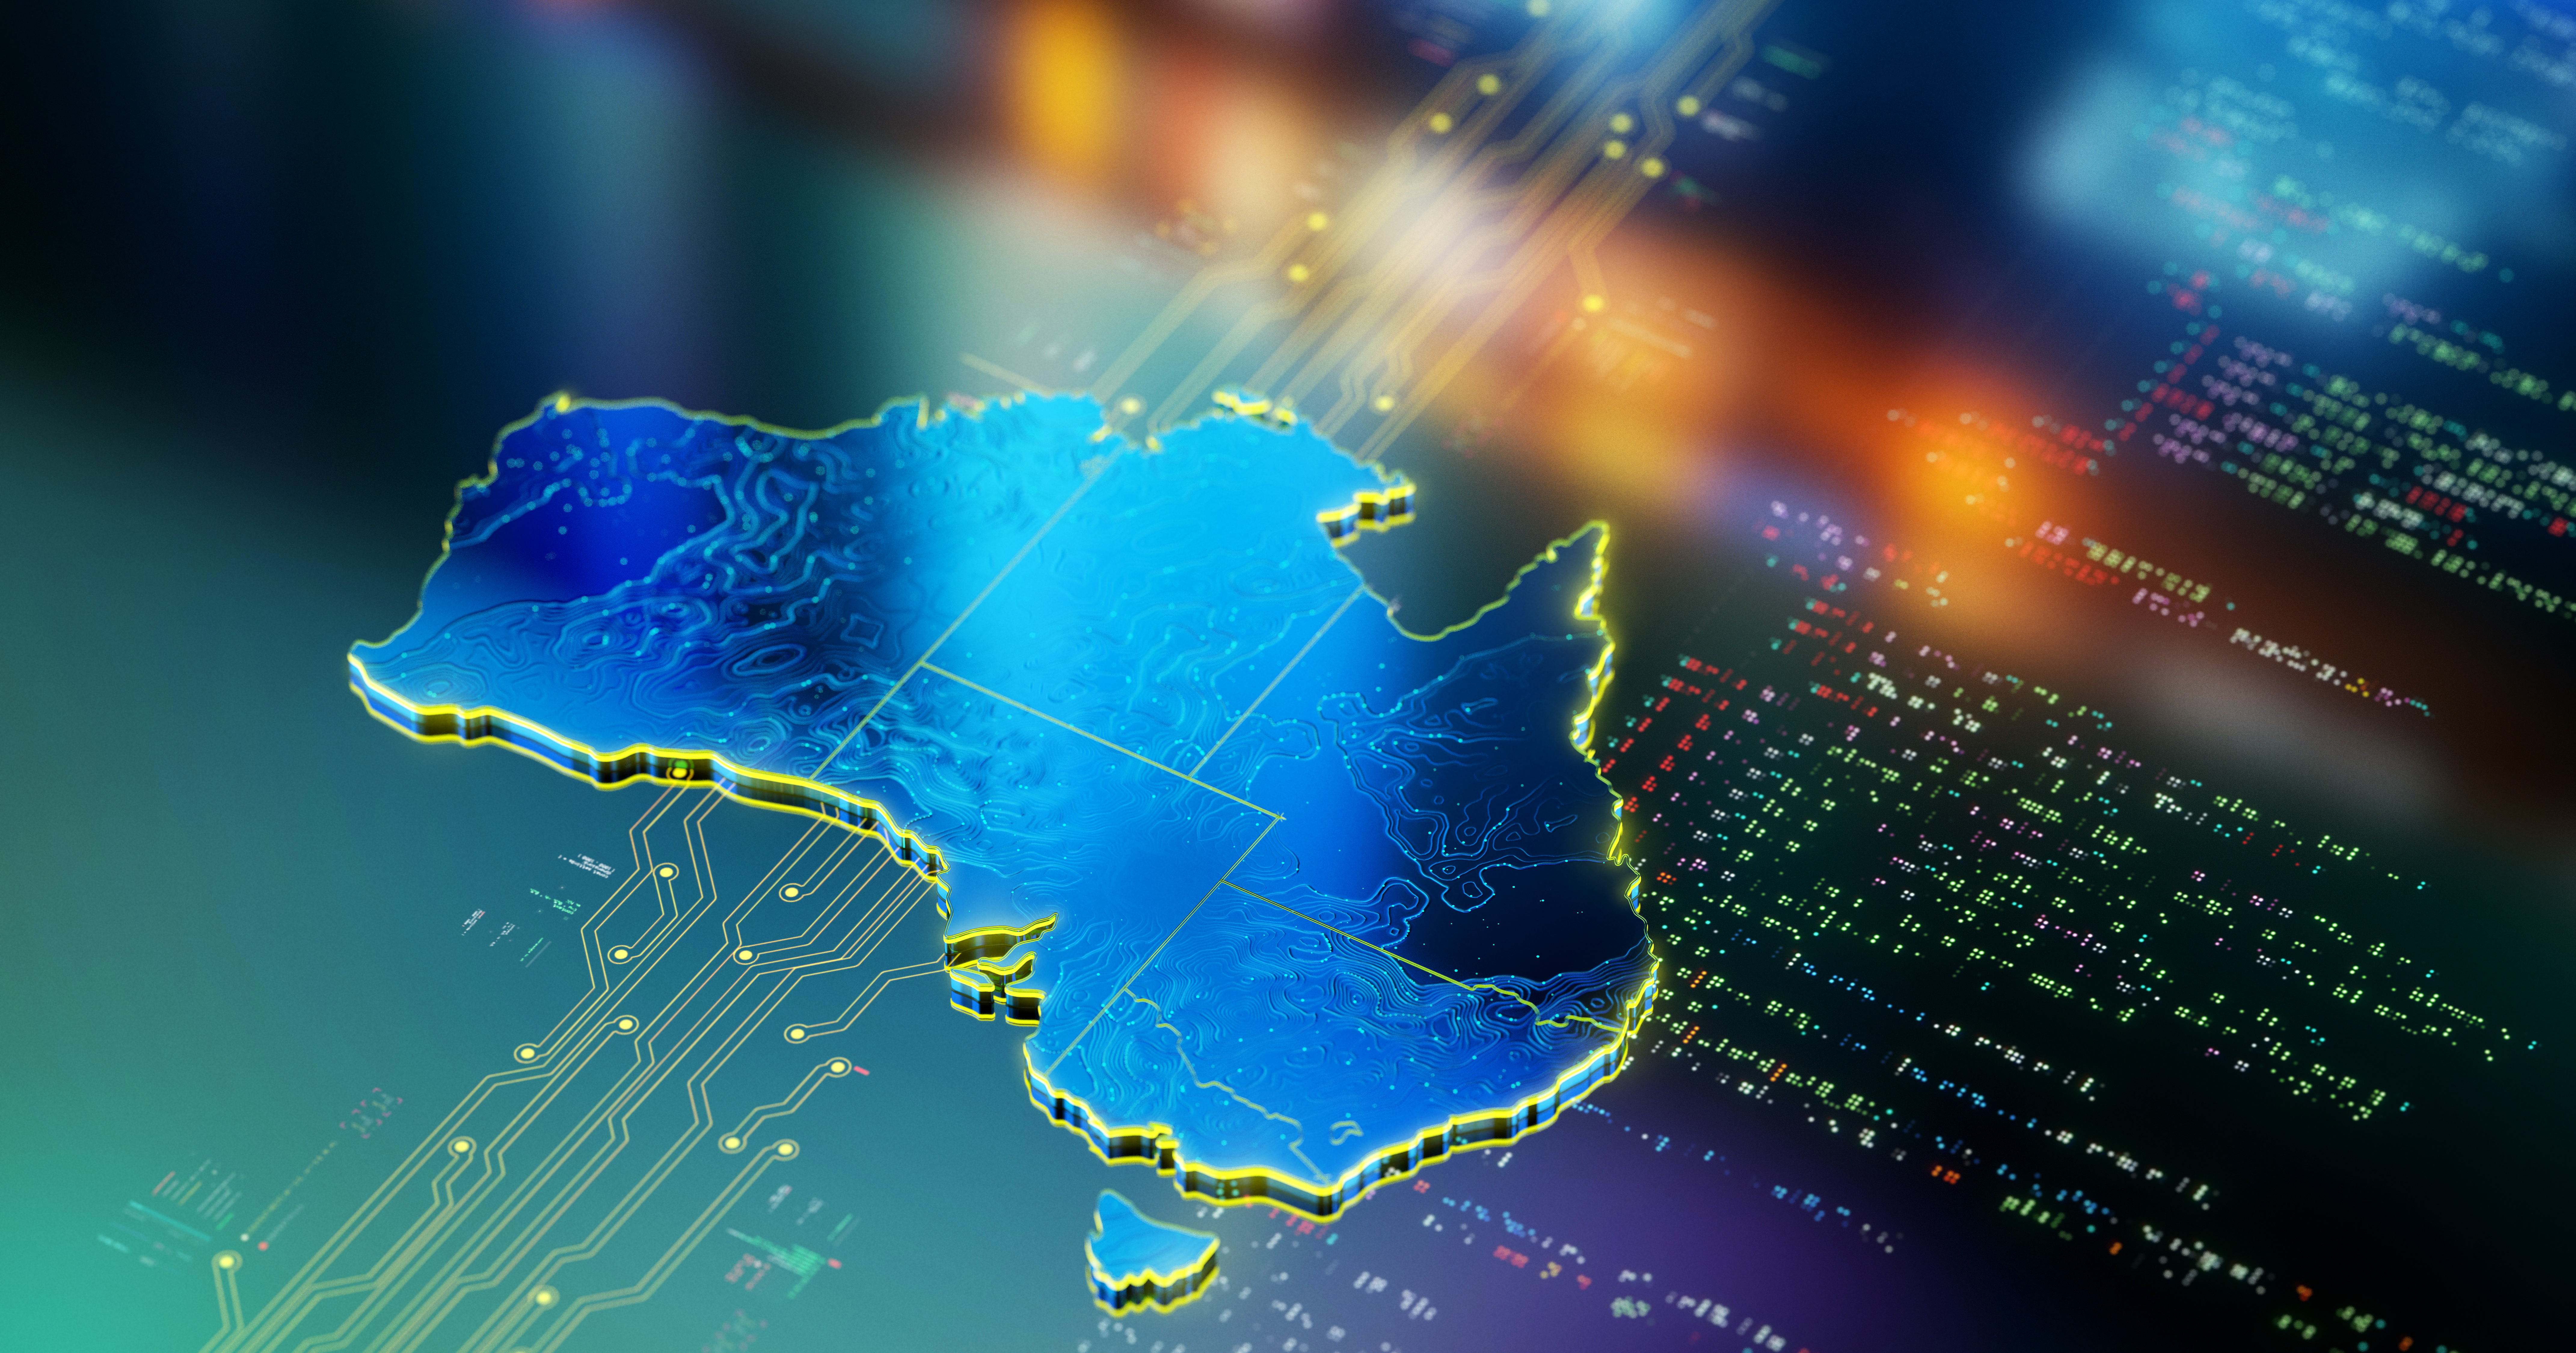 Supporting SMBs: Australian Gov Invests 41.6M in Cyber Security Support